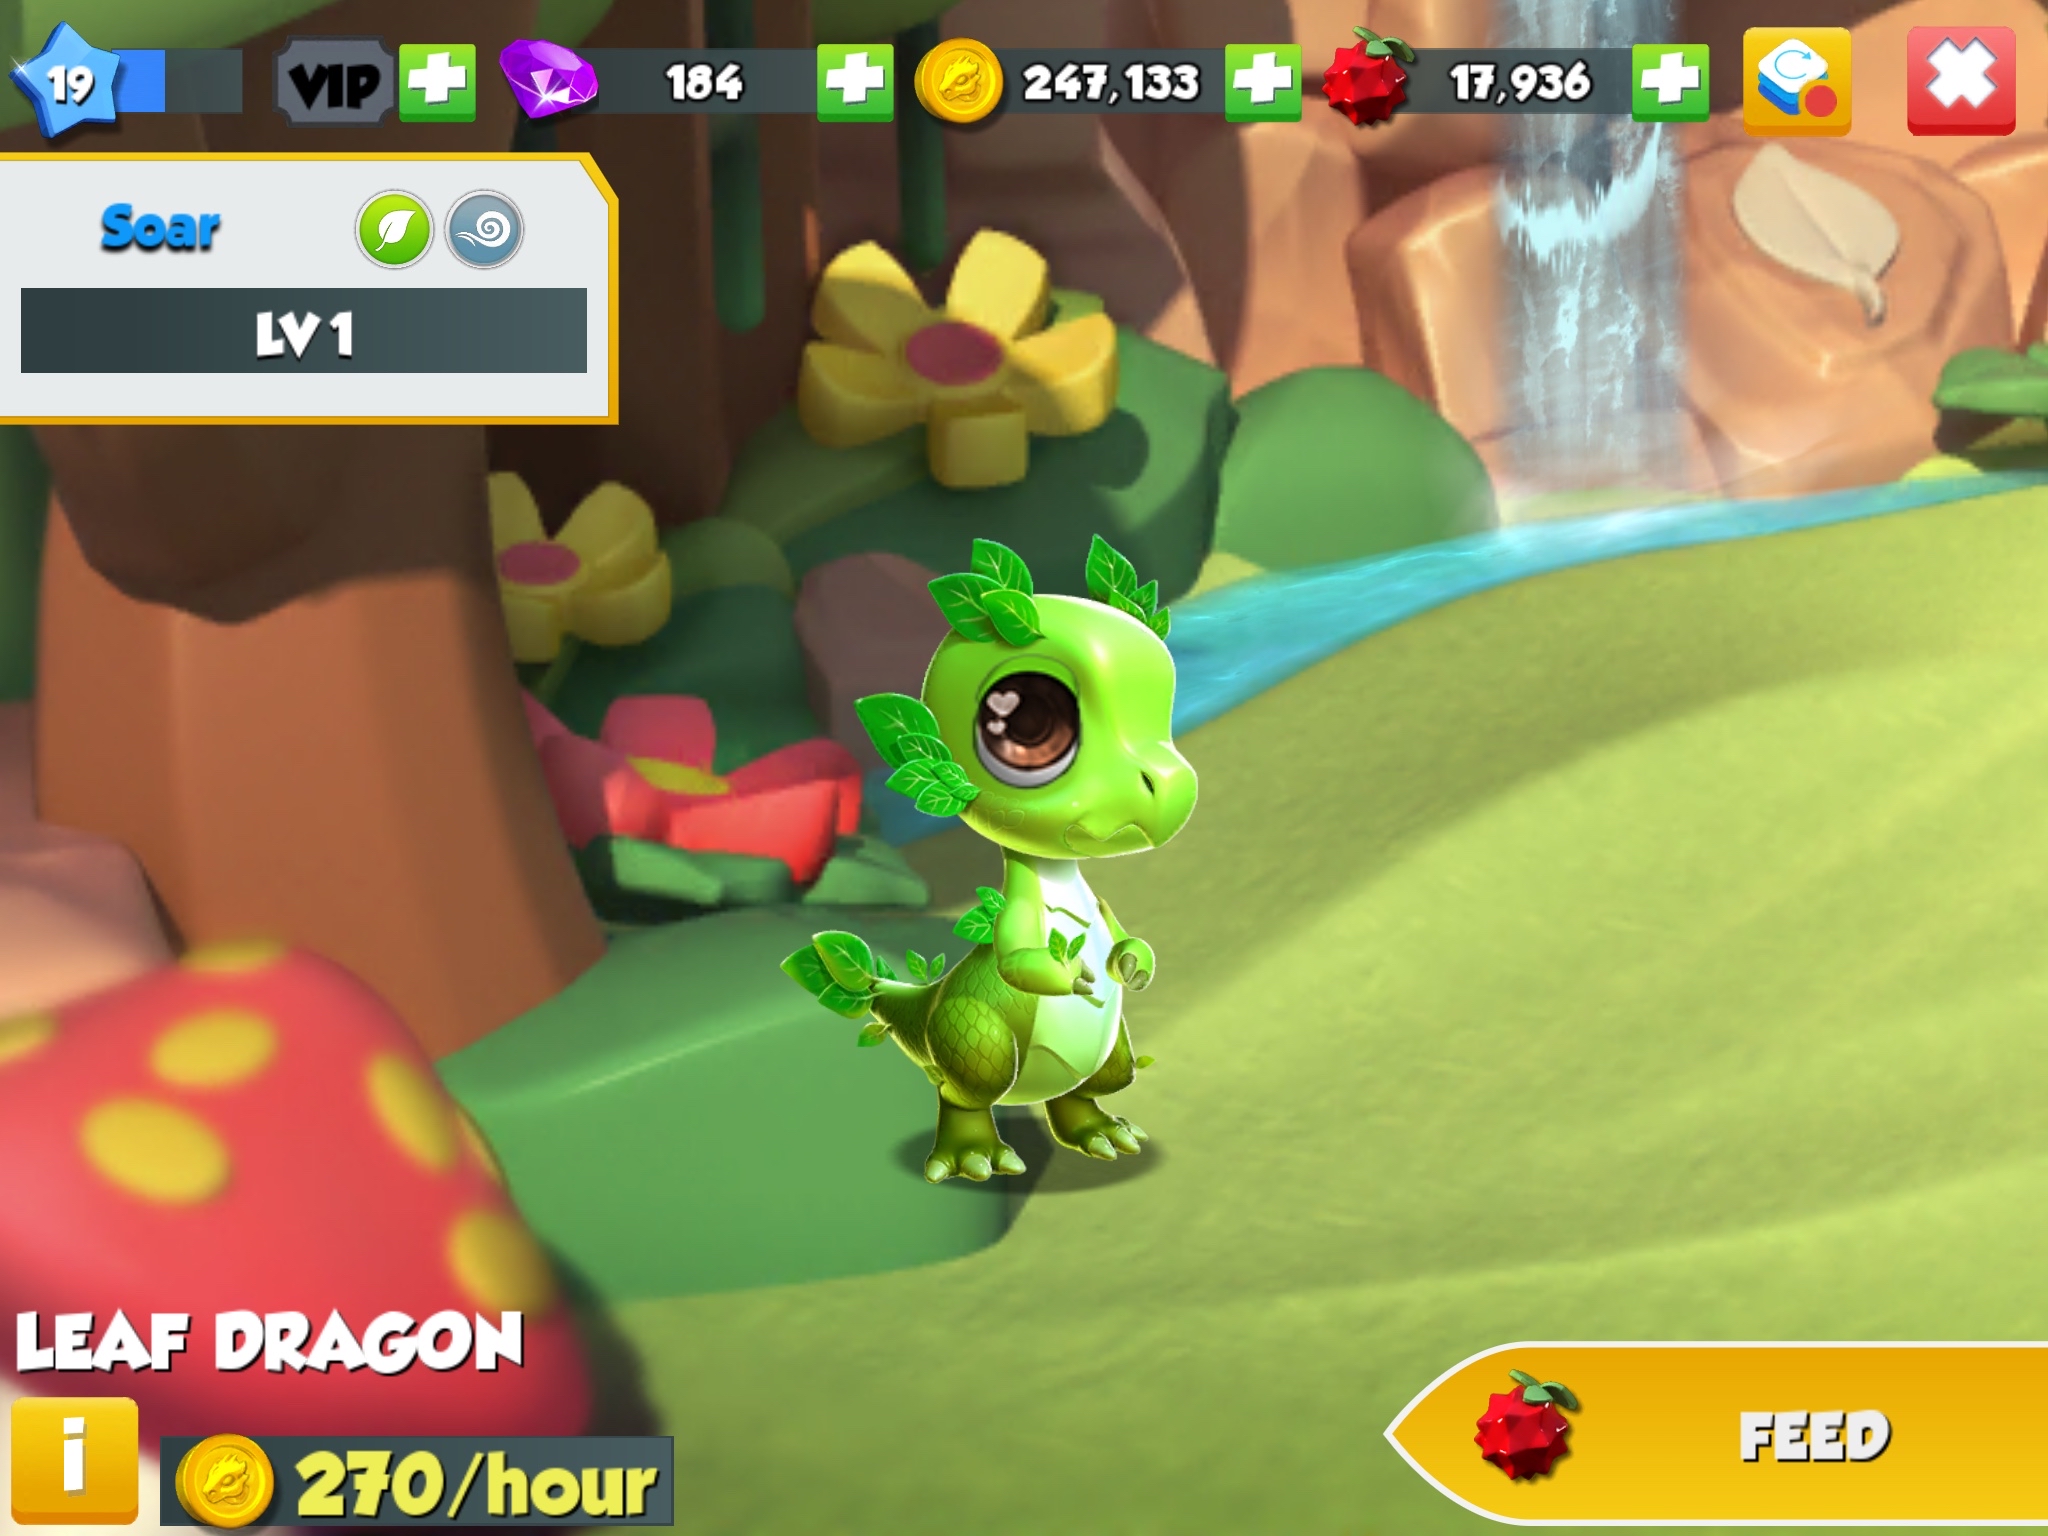 how long does it take for a plant dragon to hatch on mania legends